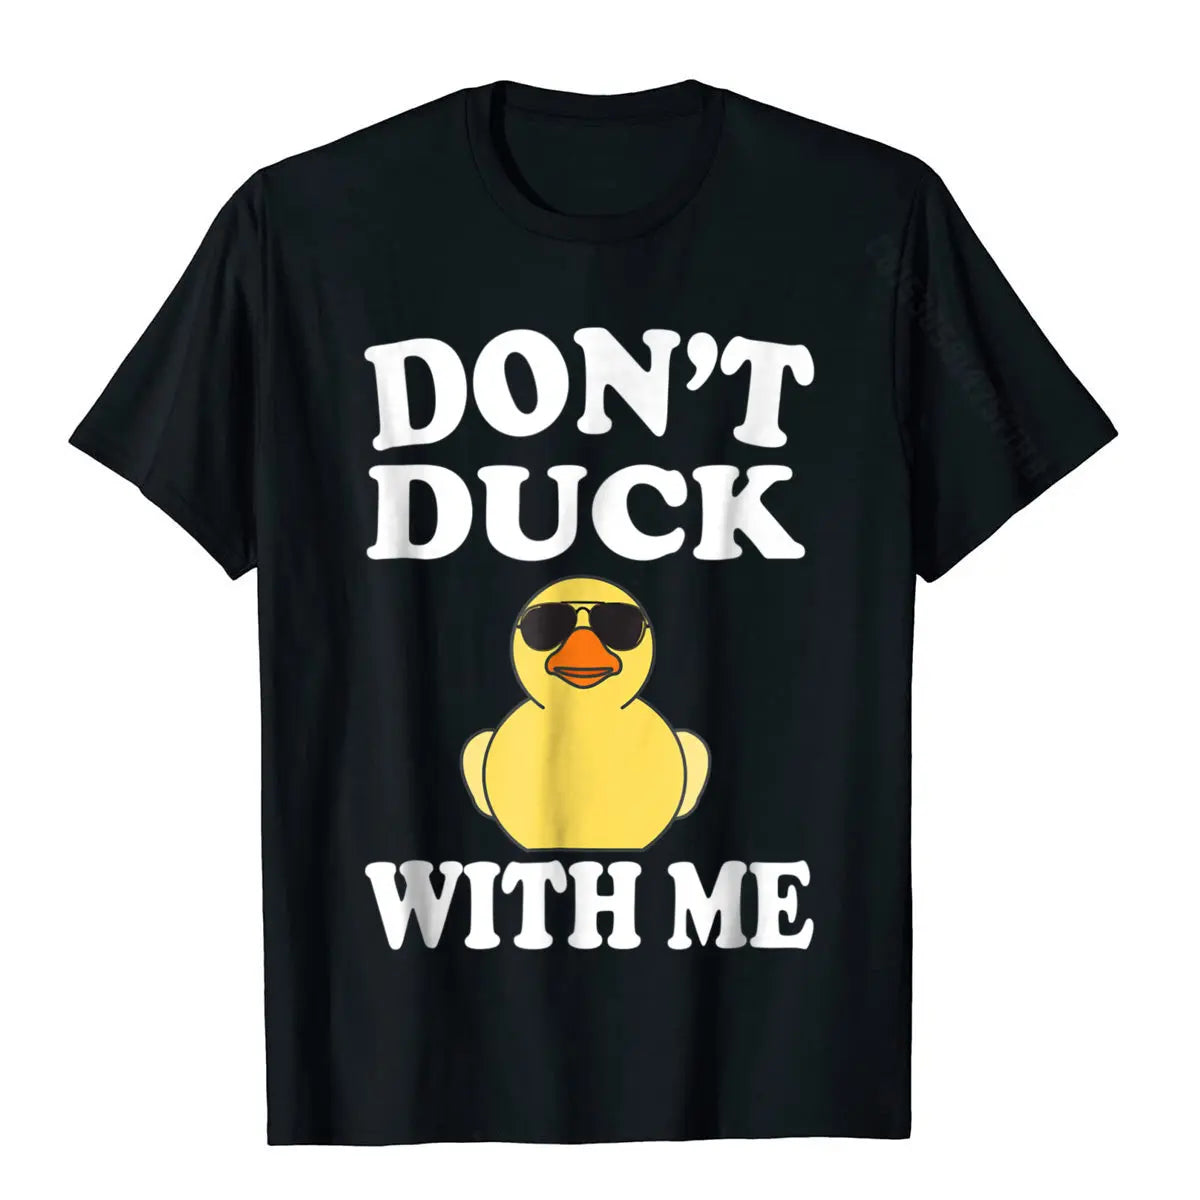 Don't Duck With Me Funny Rubber Duck Ducks Gift T-Shirt Printed On Cotton Men T Shirt Crazy Funky Tshirts